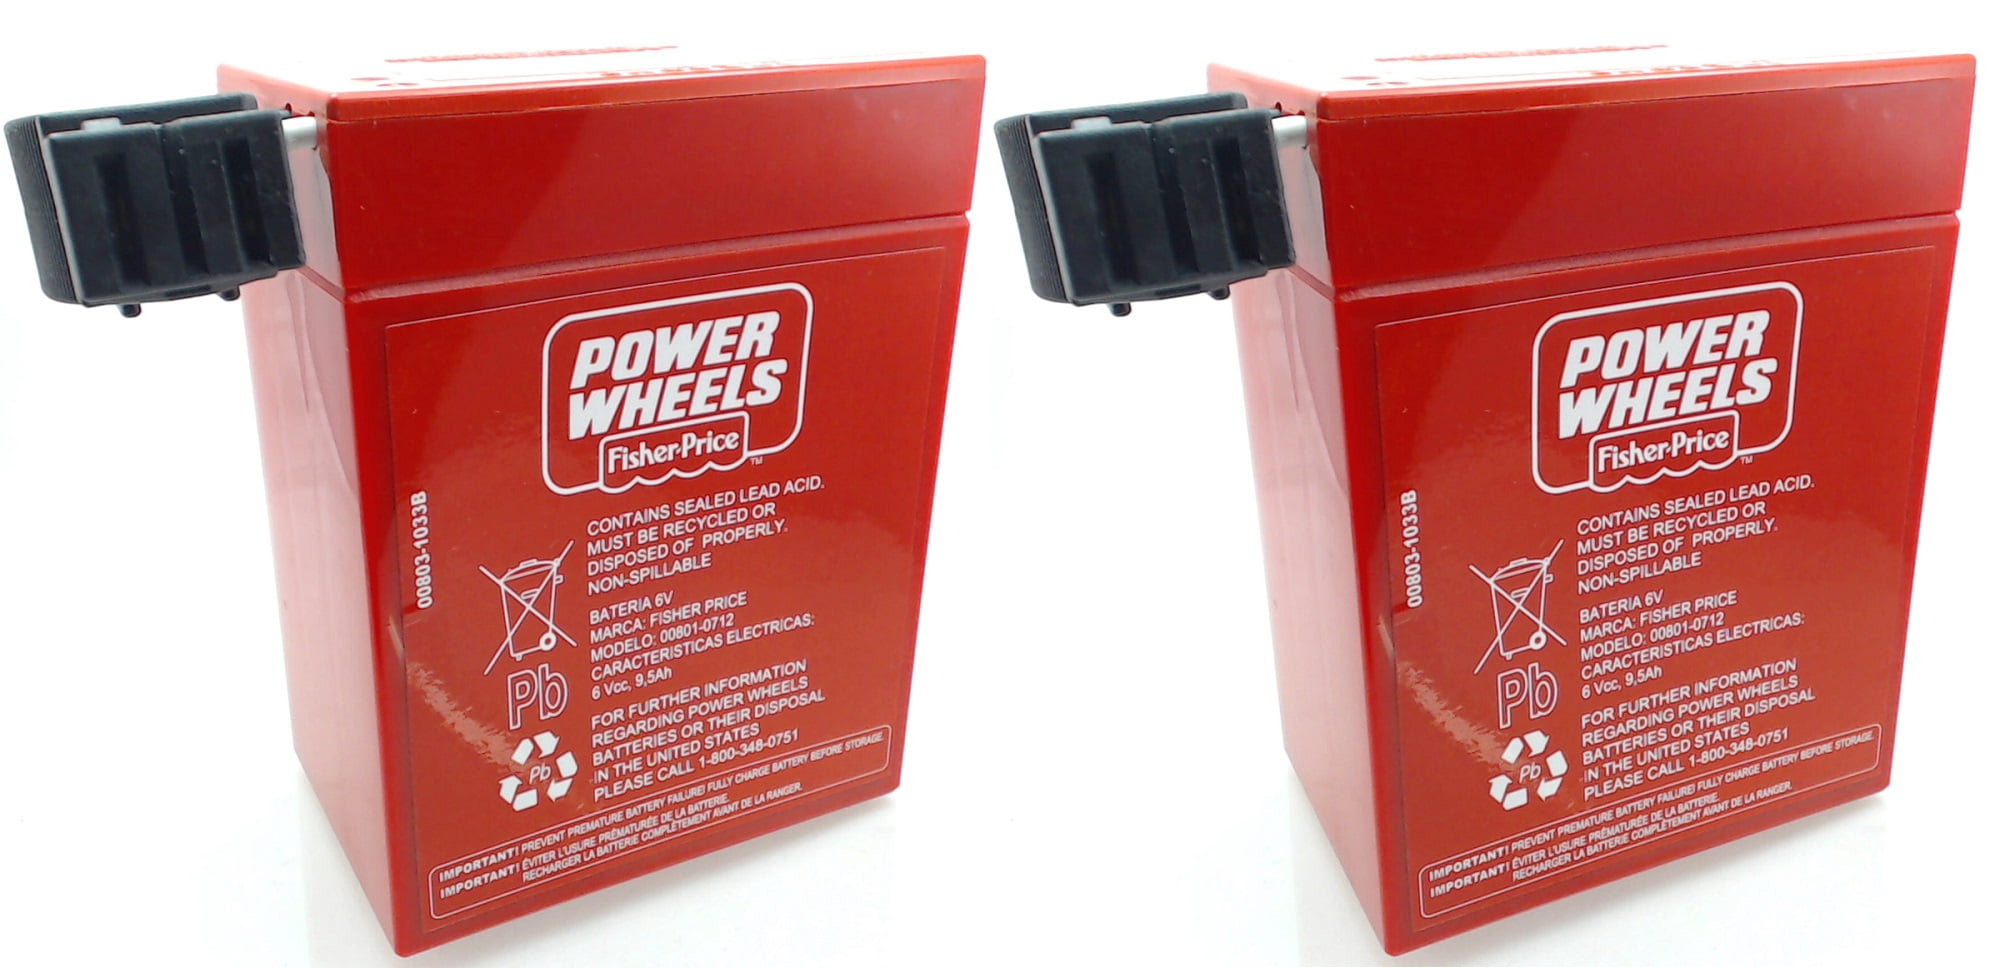 Power Wheels Super 6 Volt Red Battery, 00801-0712, Two Pack (2 Batteries)